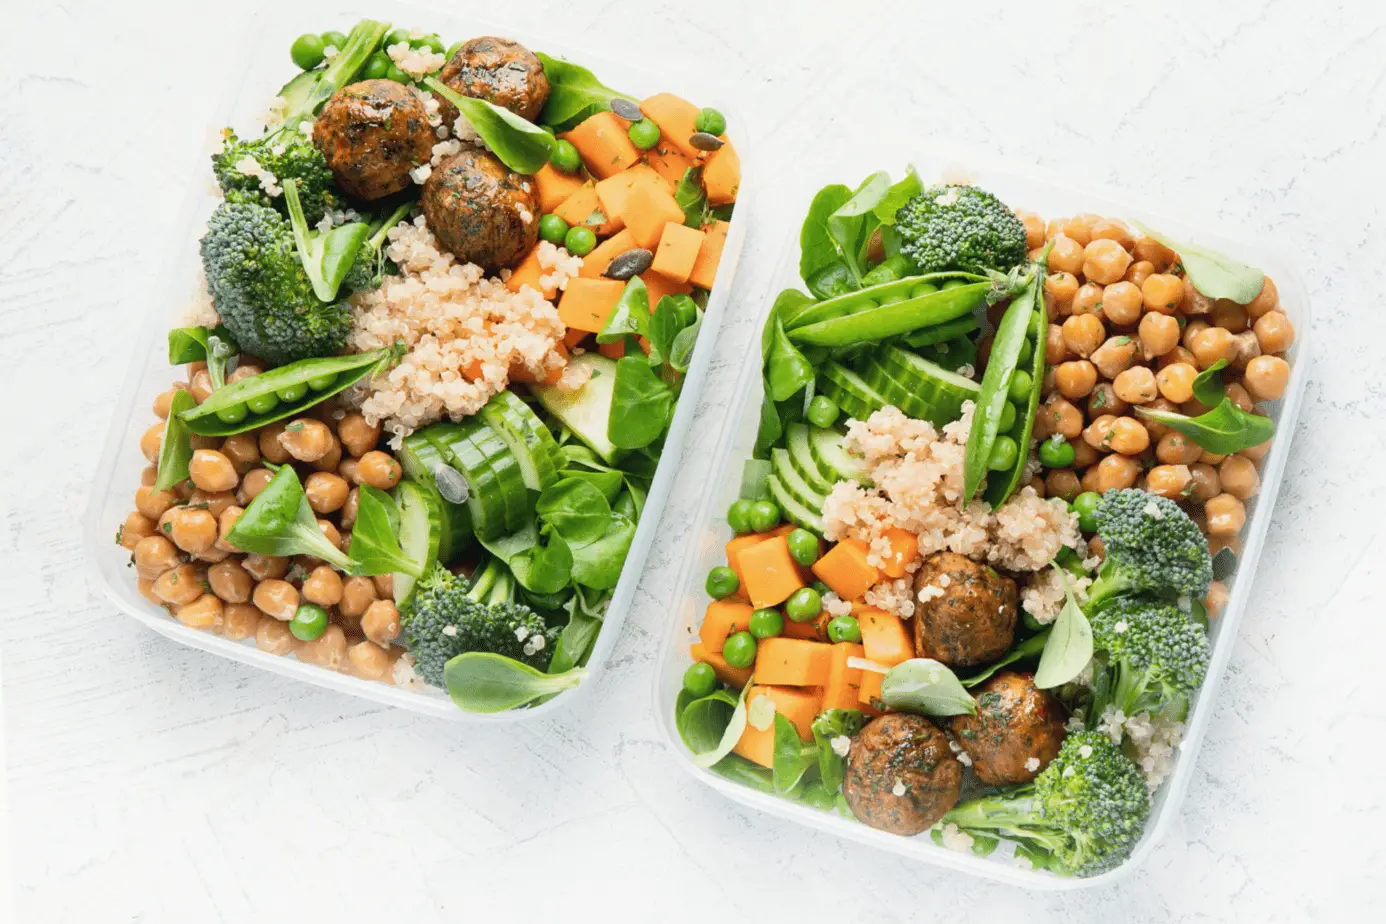 two bento boxes containing vegan lunches - best vegan lunch ideas